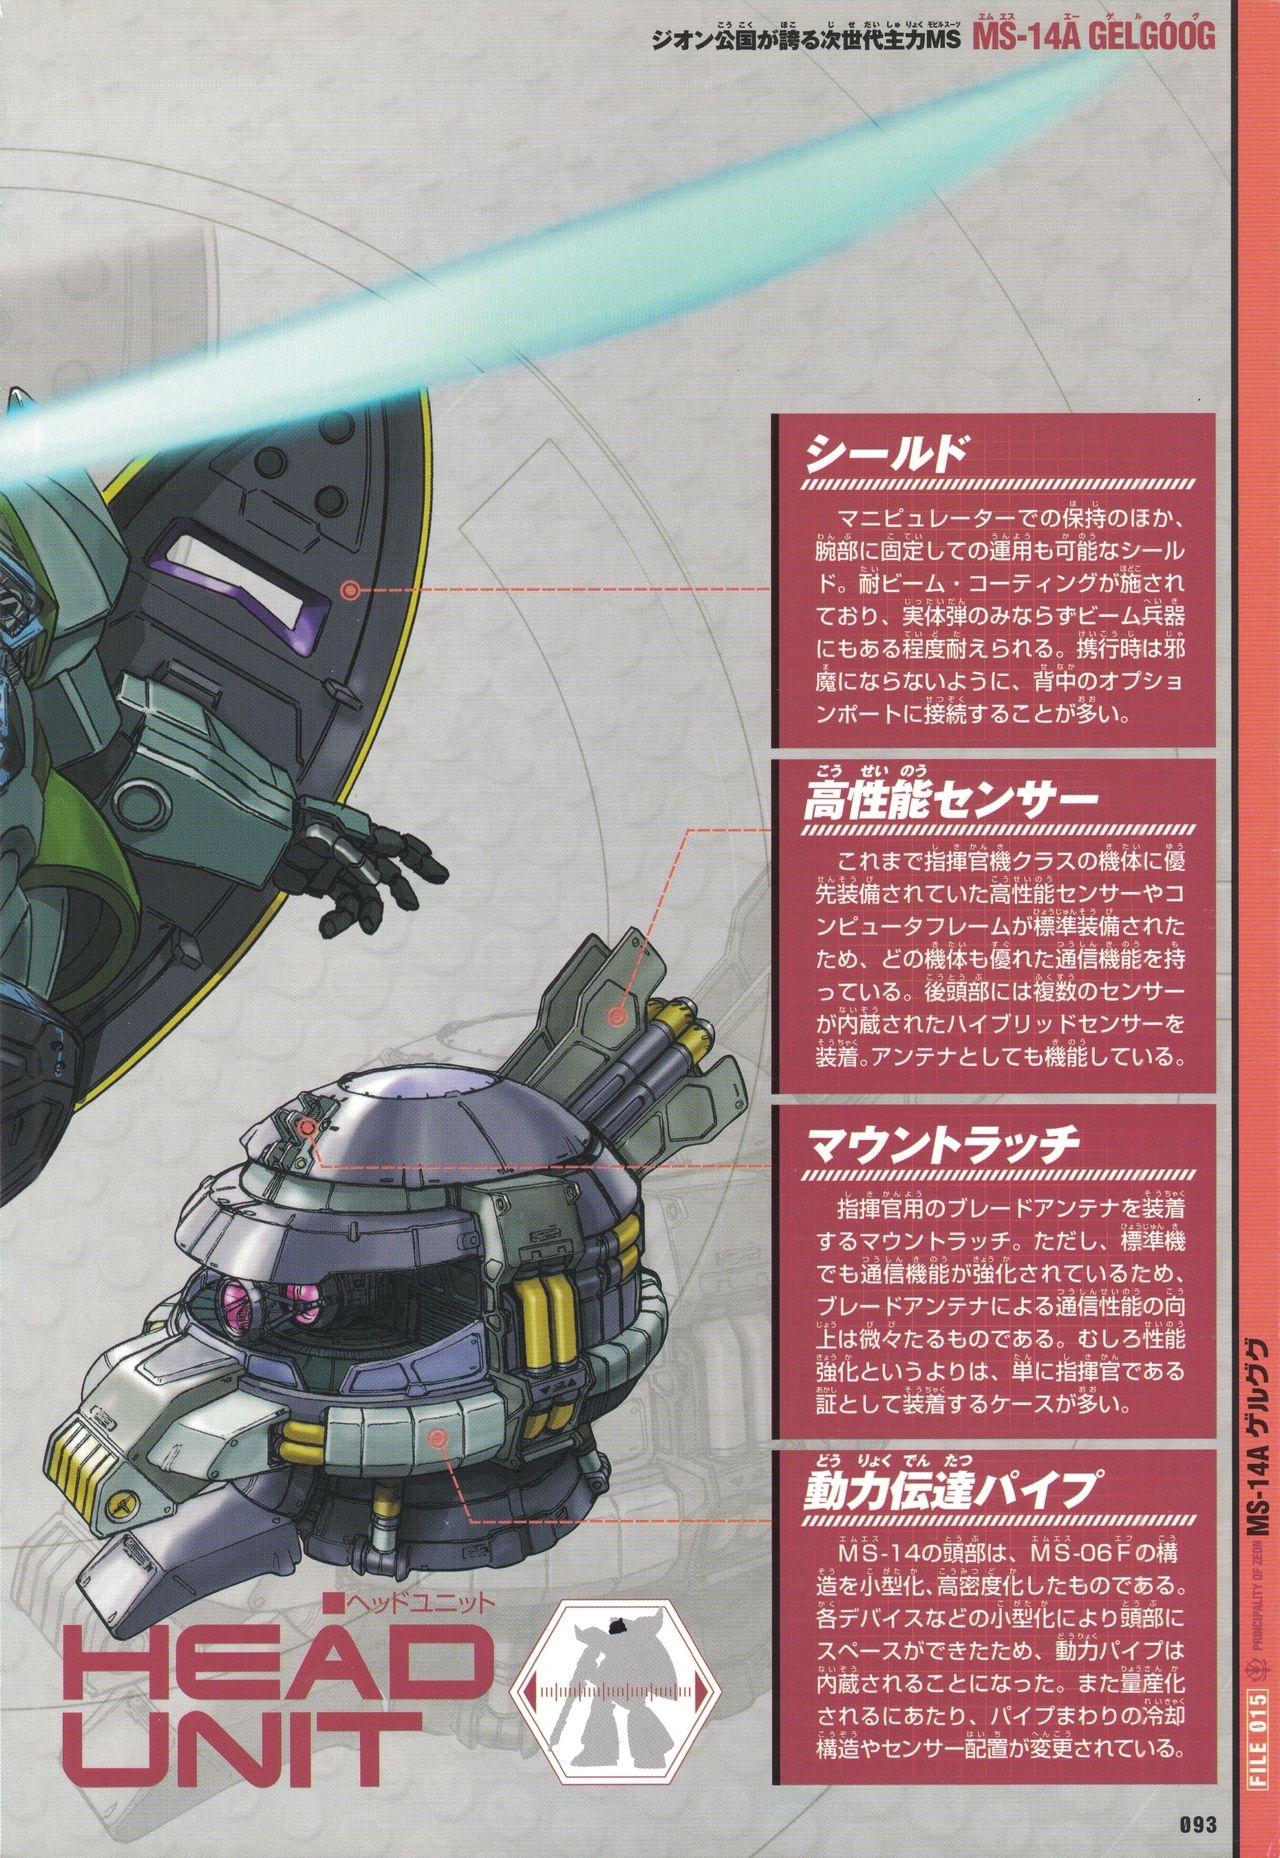 Mobile Suit Gundam - New Cross-Section Book - One Year War Edition 97